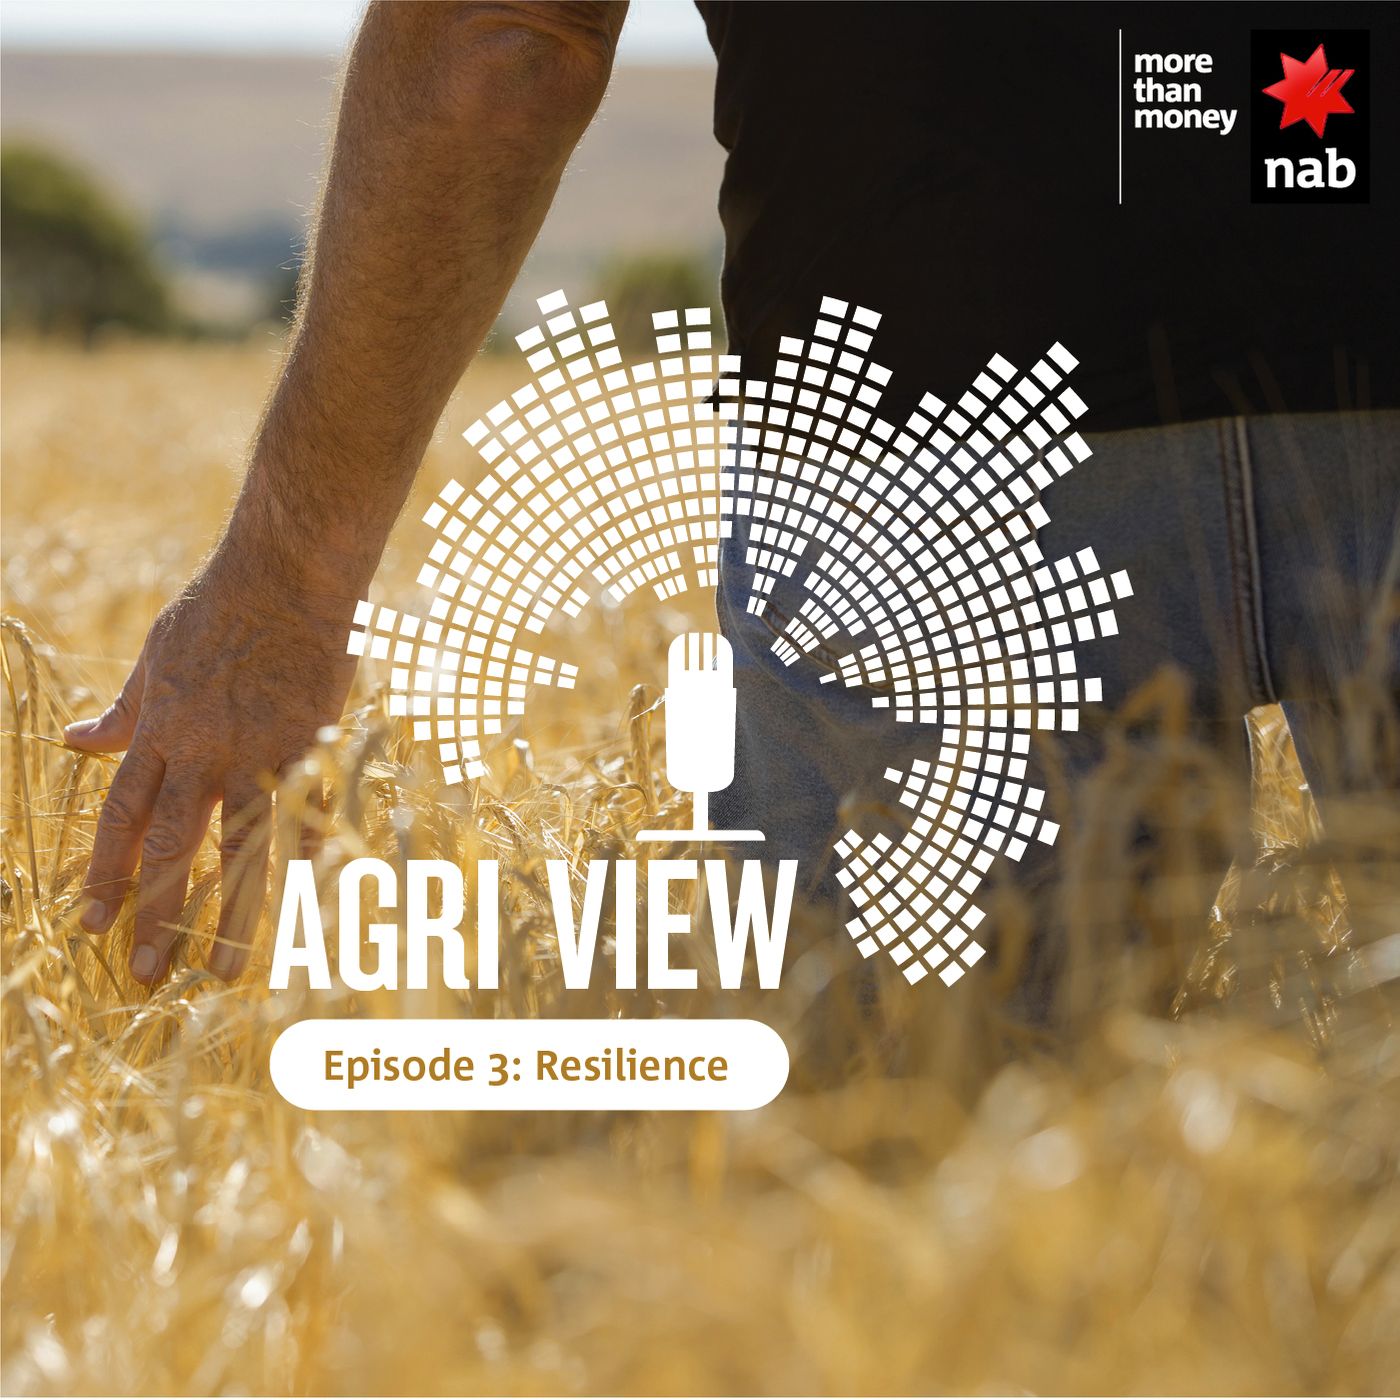 Agri View Episode 3: Resilience